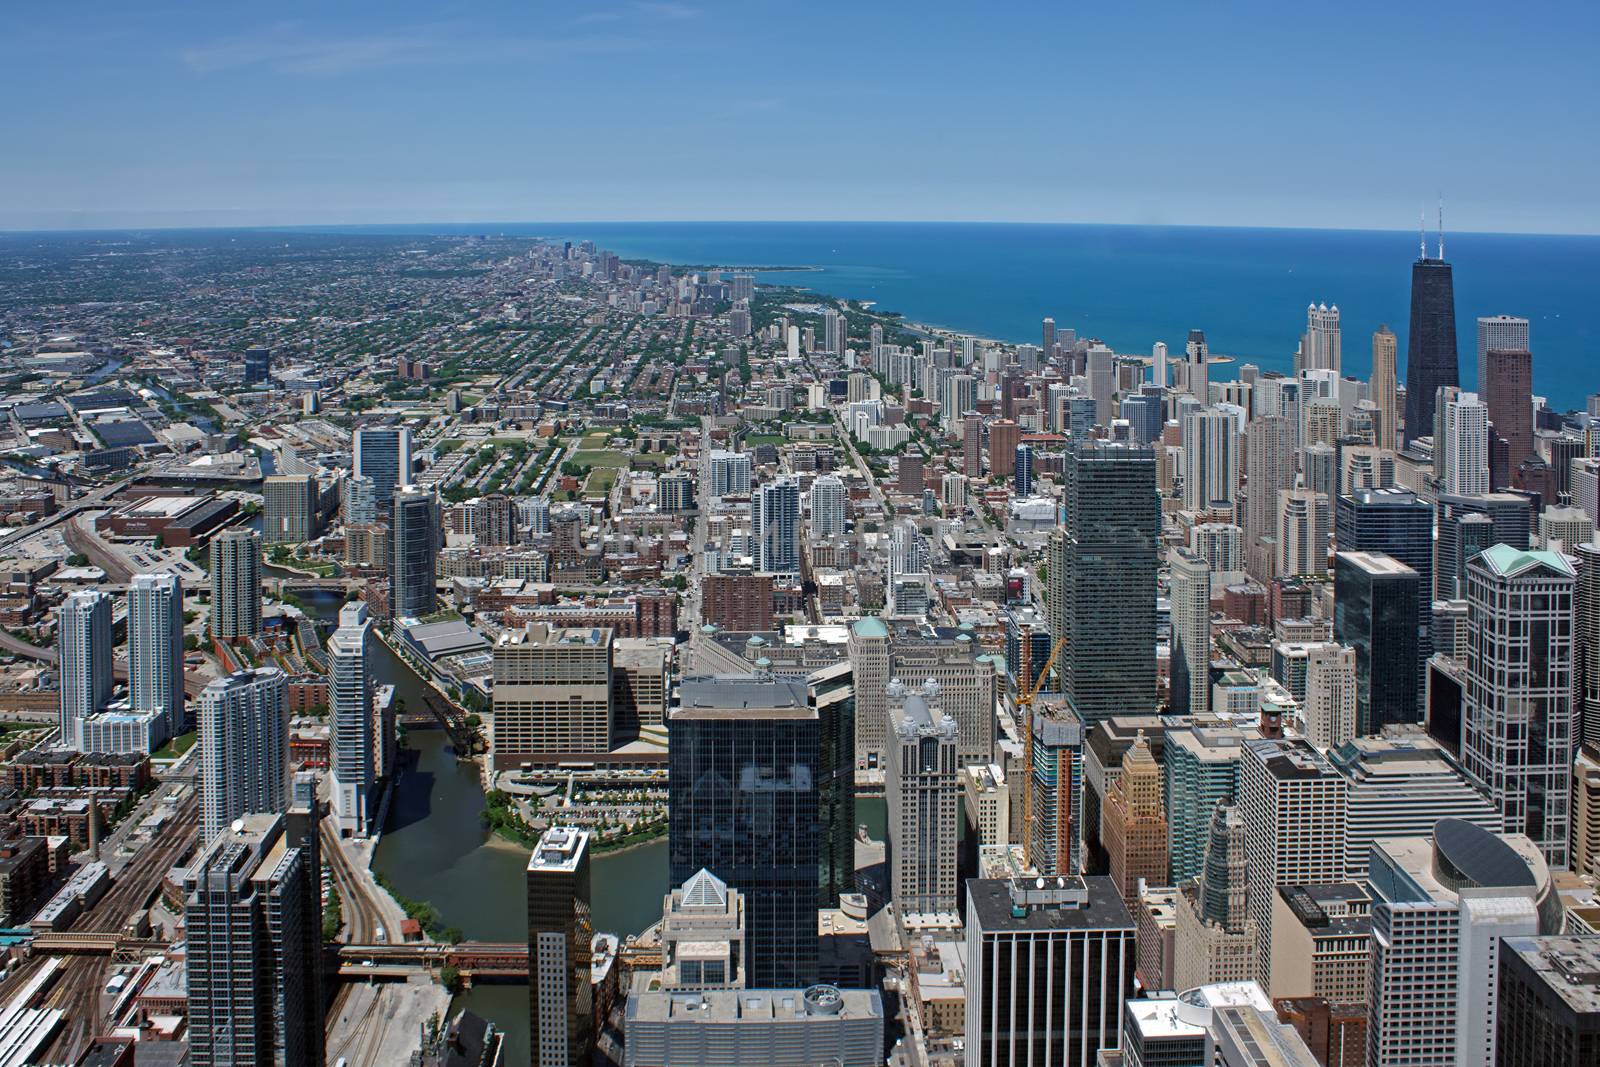 Aerial view of the city of Chicago showing the densely packed buildings.